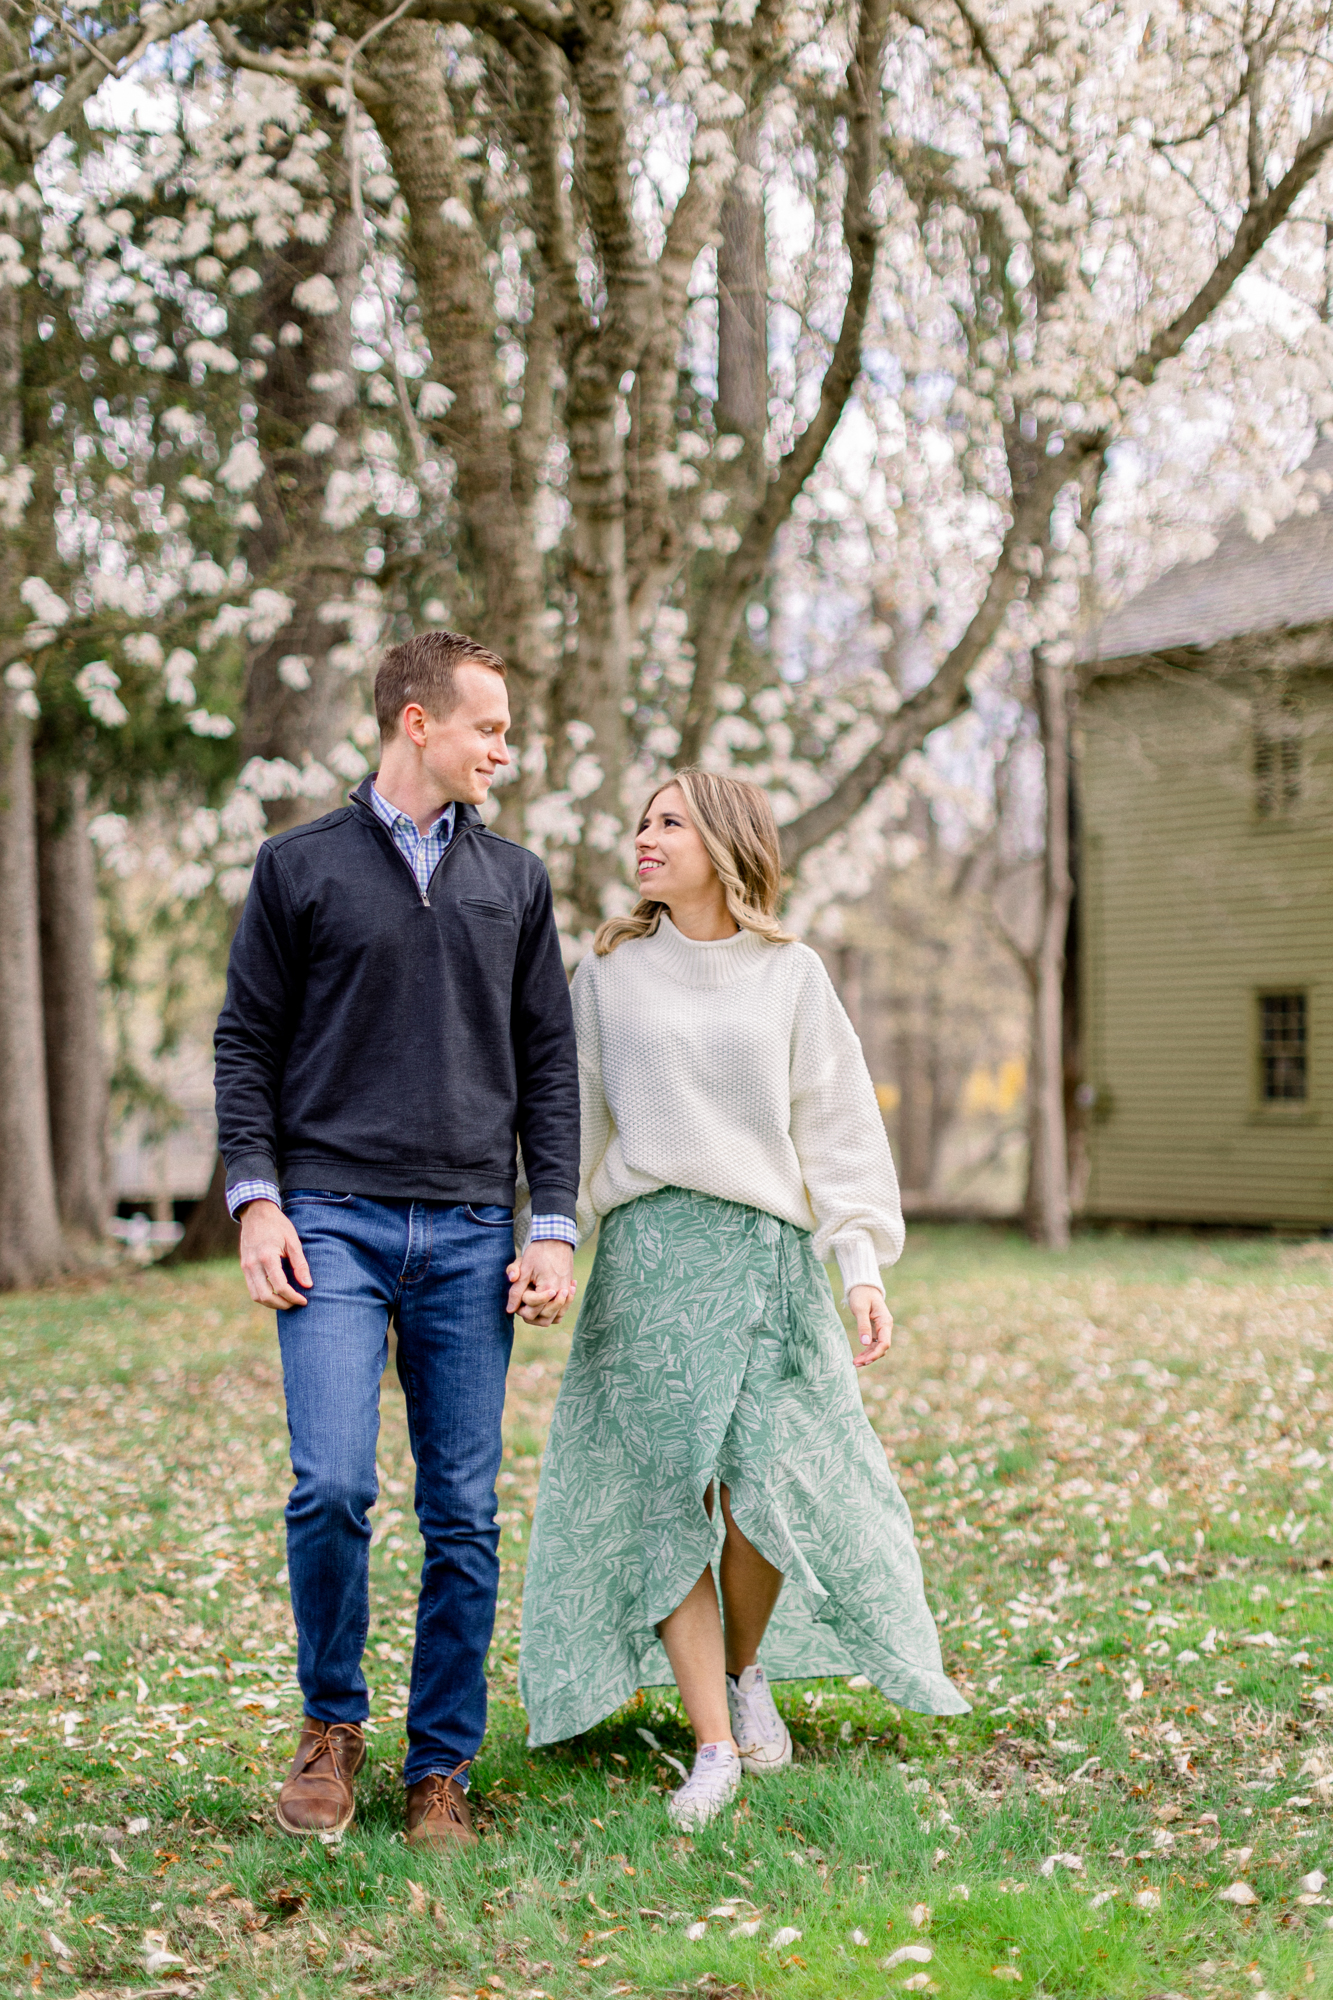 Beautiful NYC Engagement Photography with Spring Blossoms